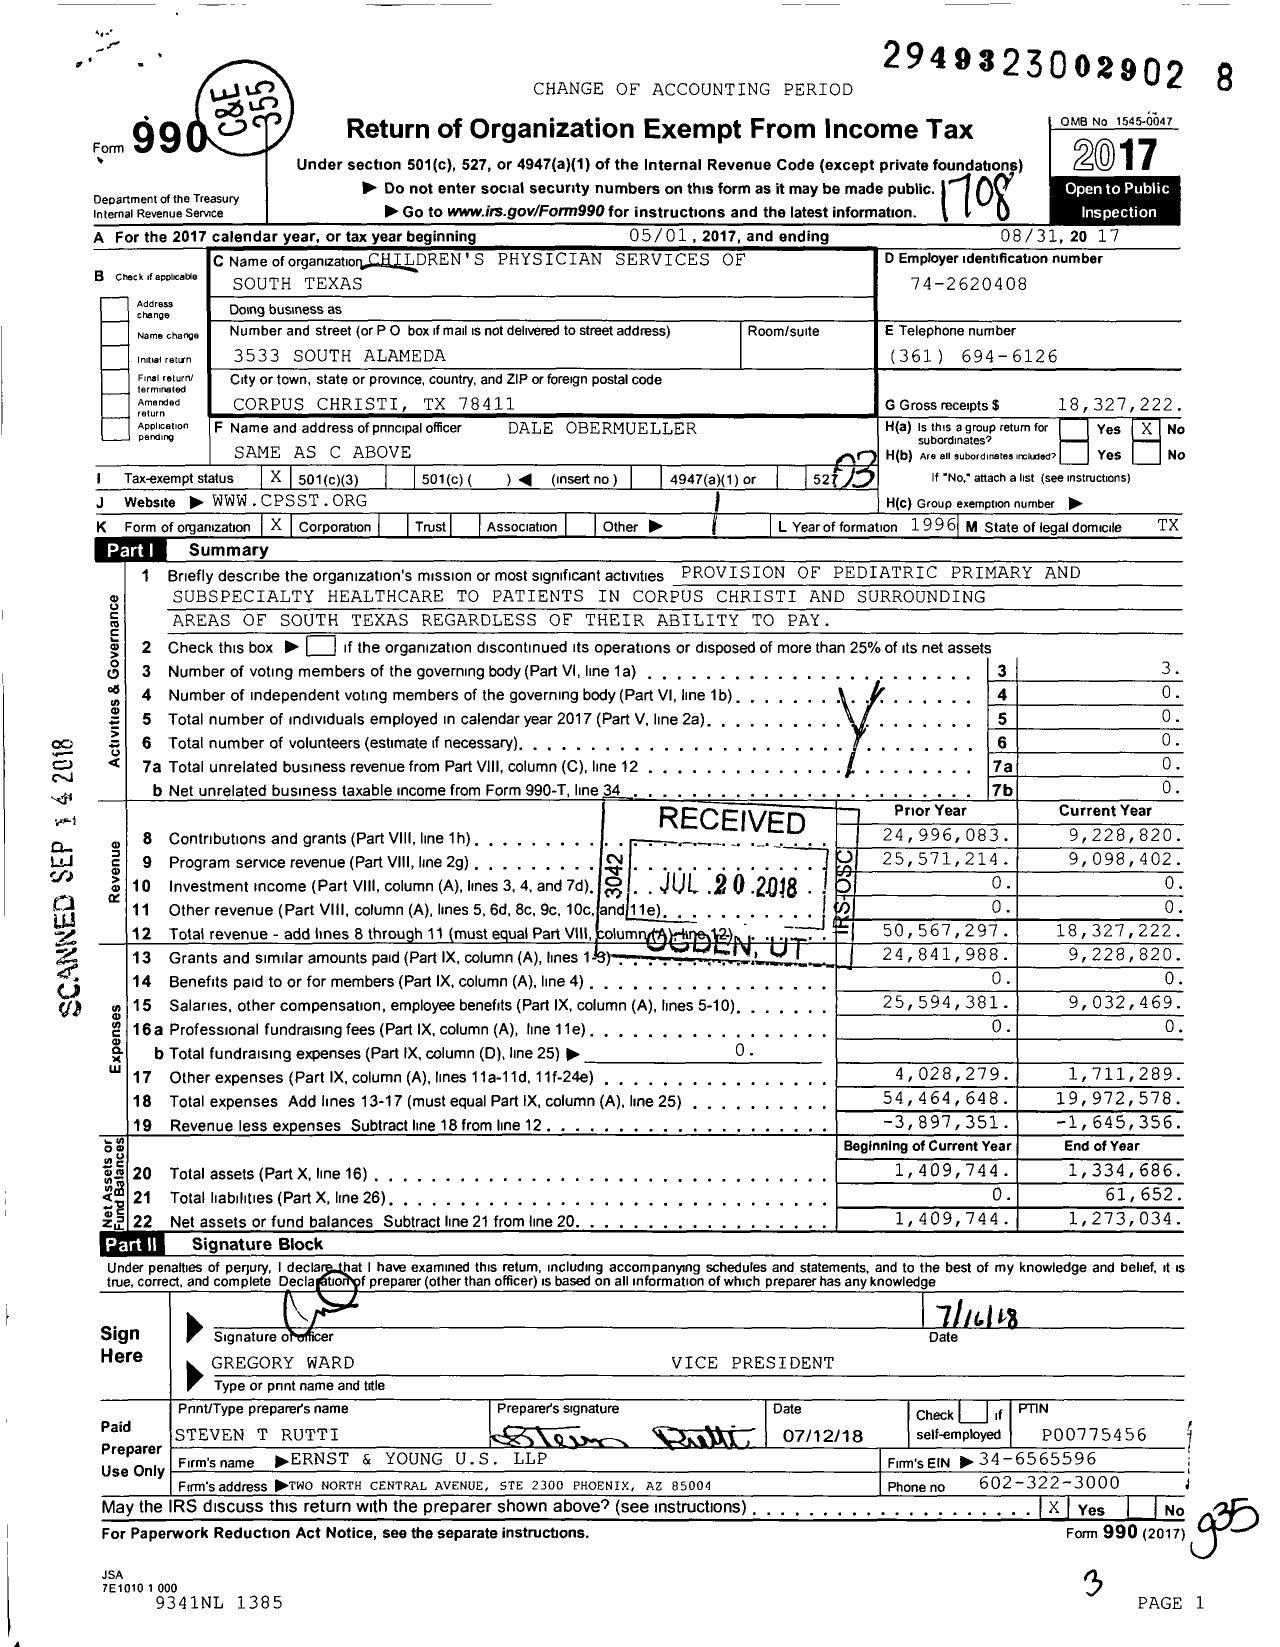 Image of first page of 2016 Form 990 for Children's Physician Services of South Texas (CPSST)